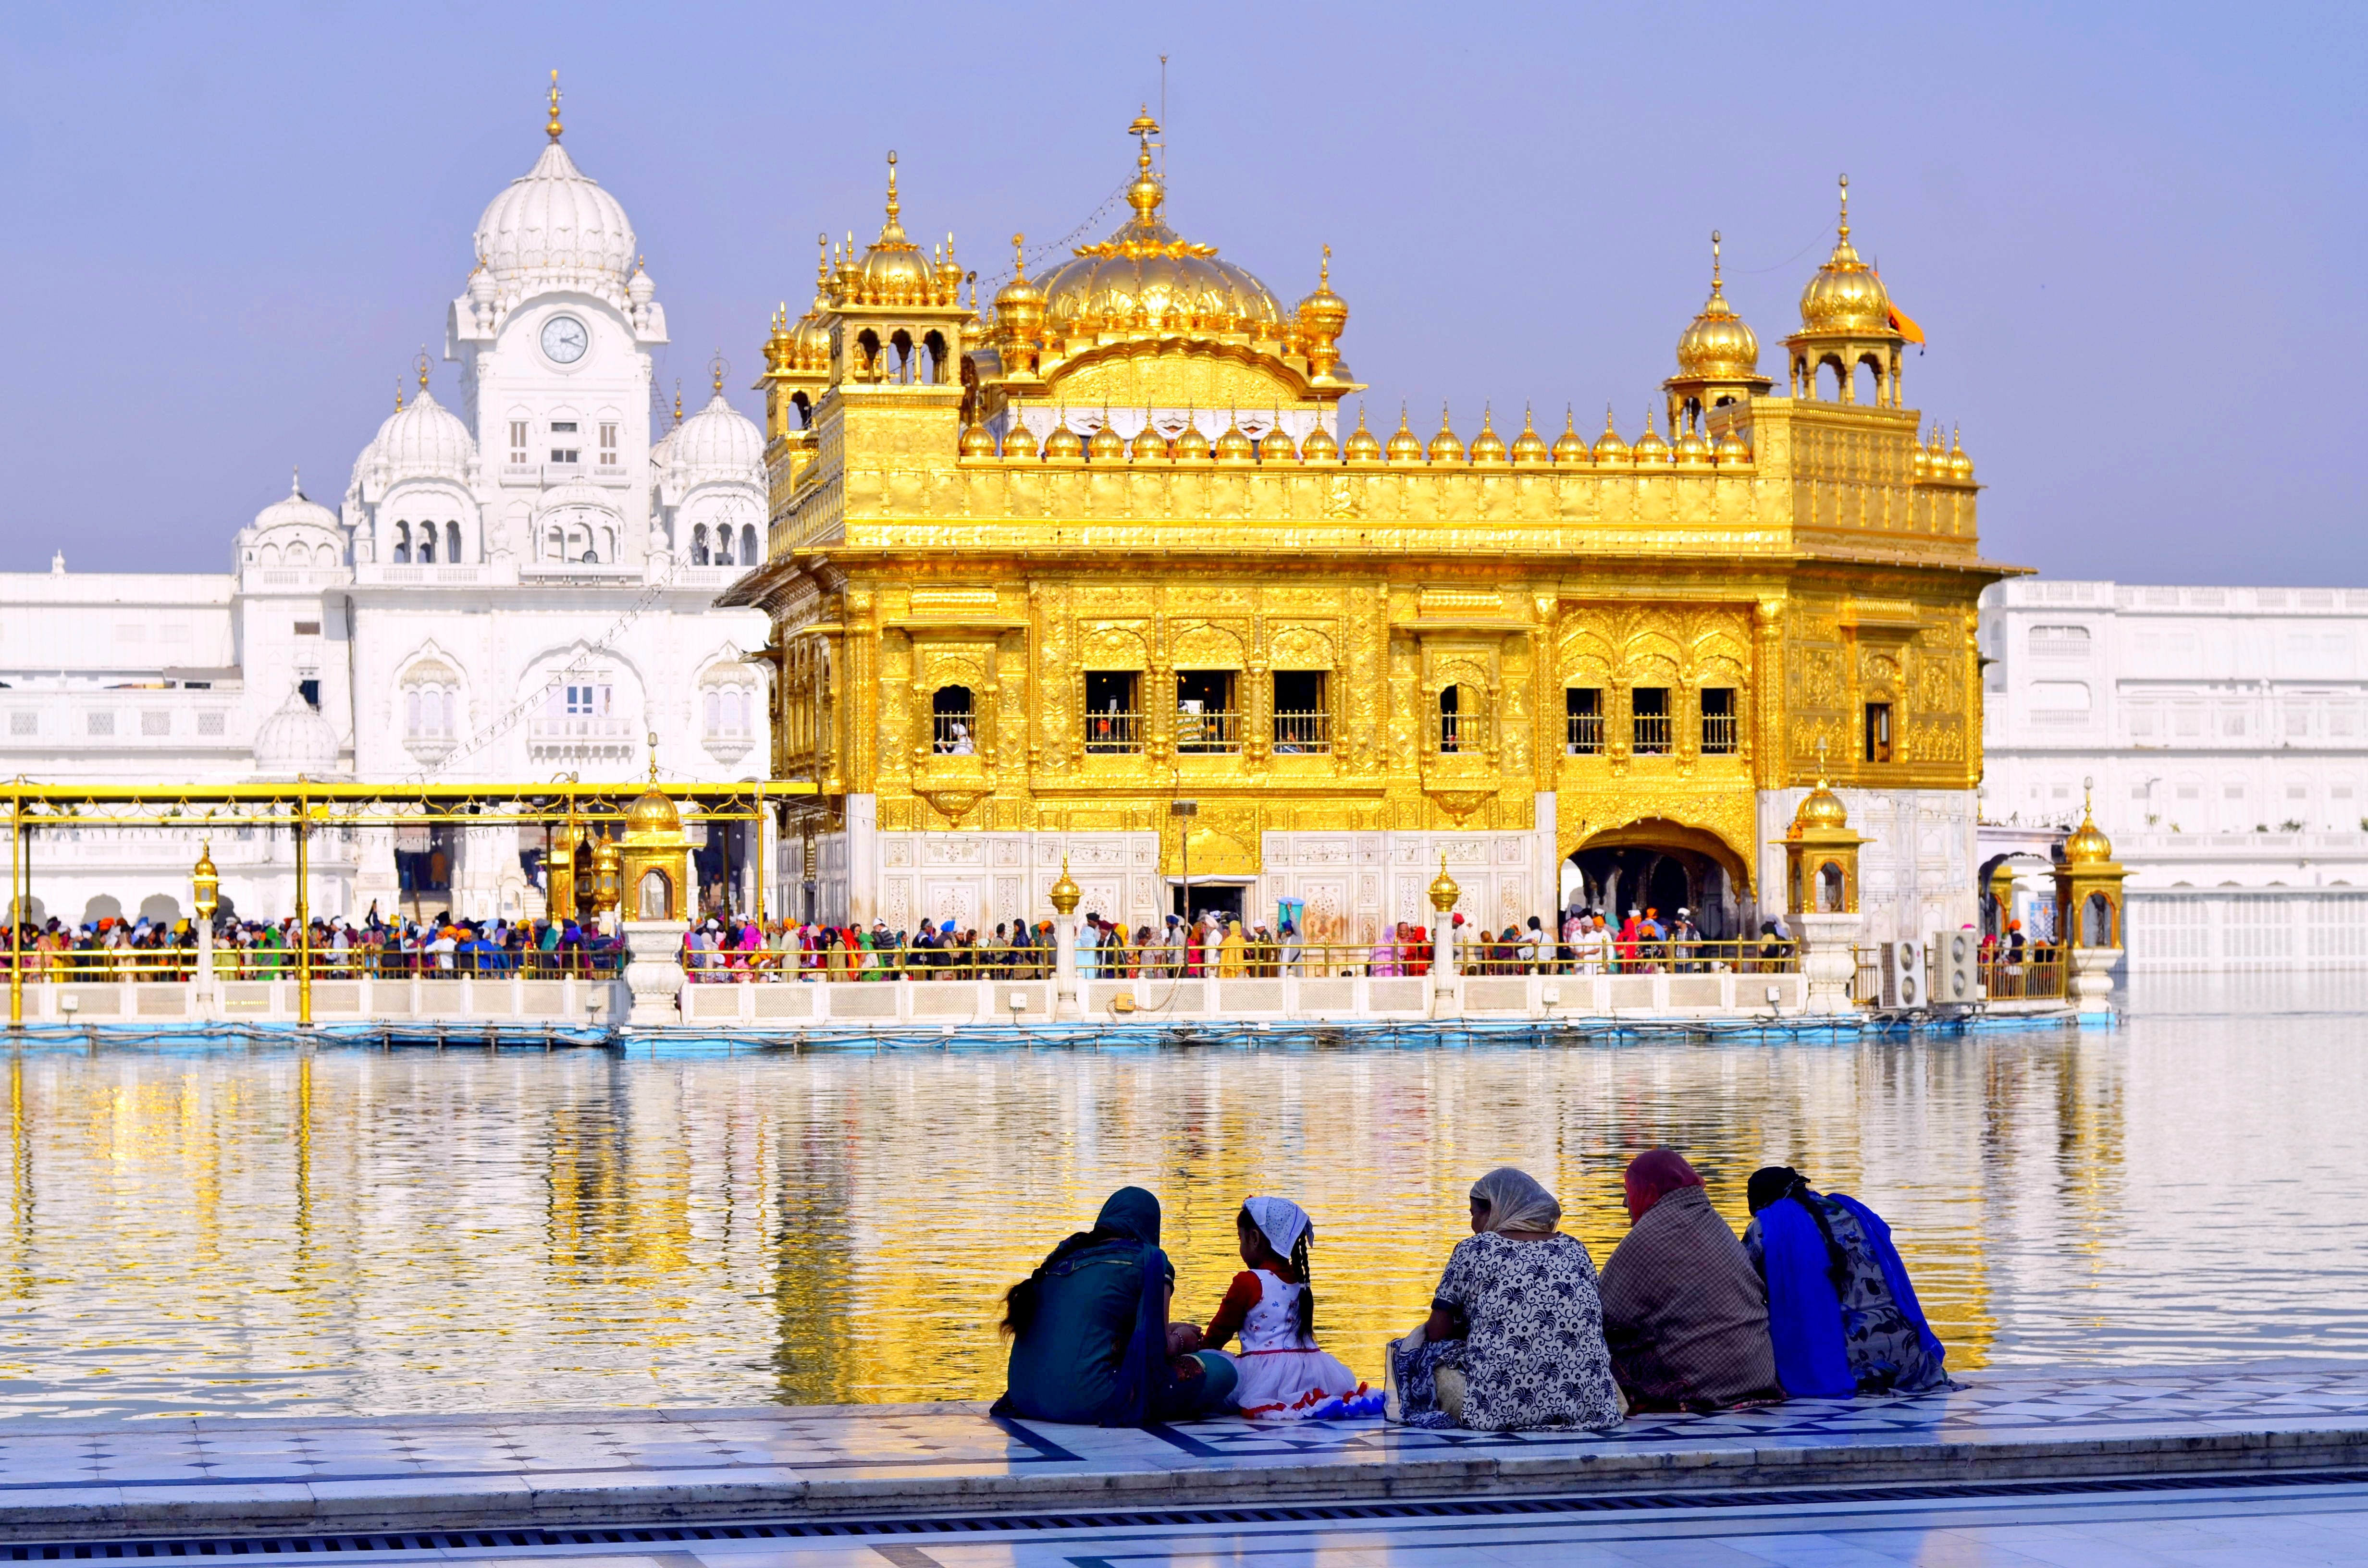 It is one of the most well-known temples in the entire world and is situated in Amritsar. (Unsplash)